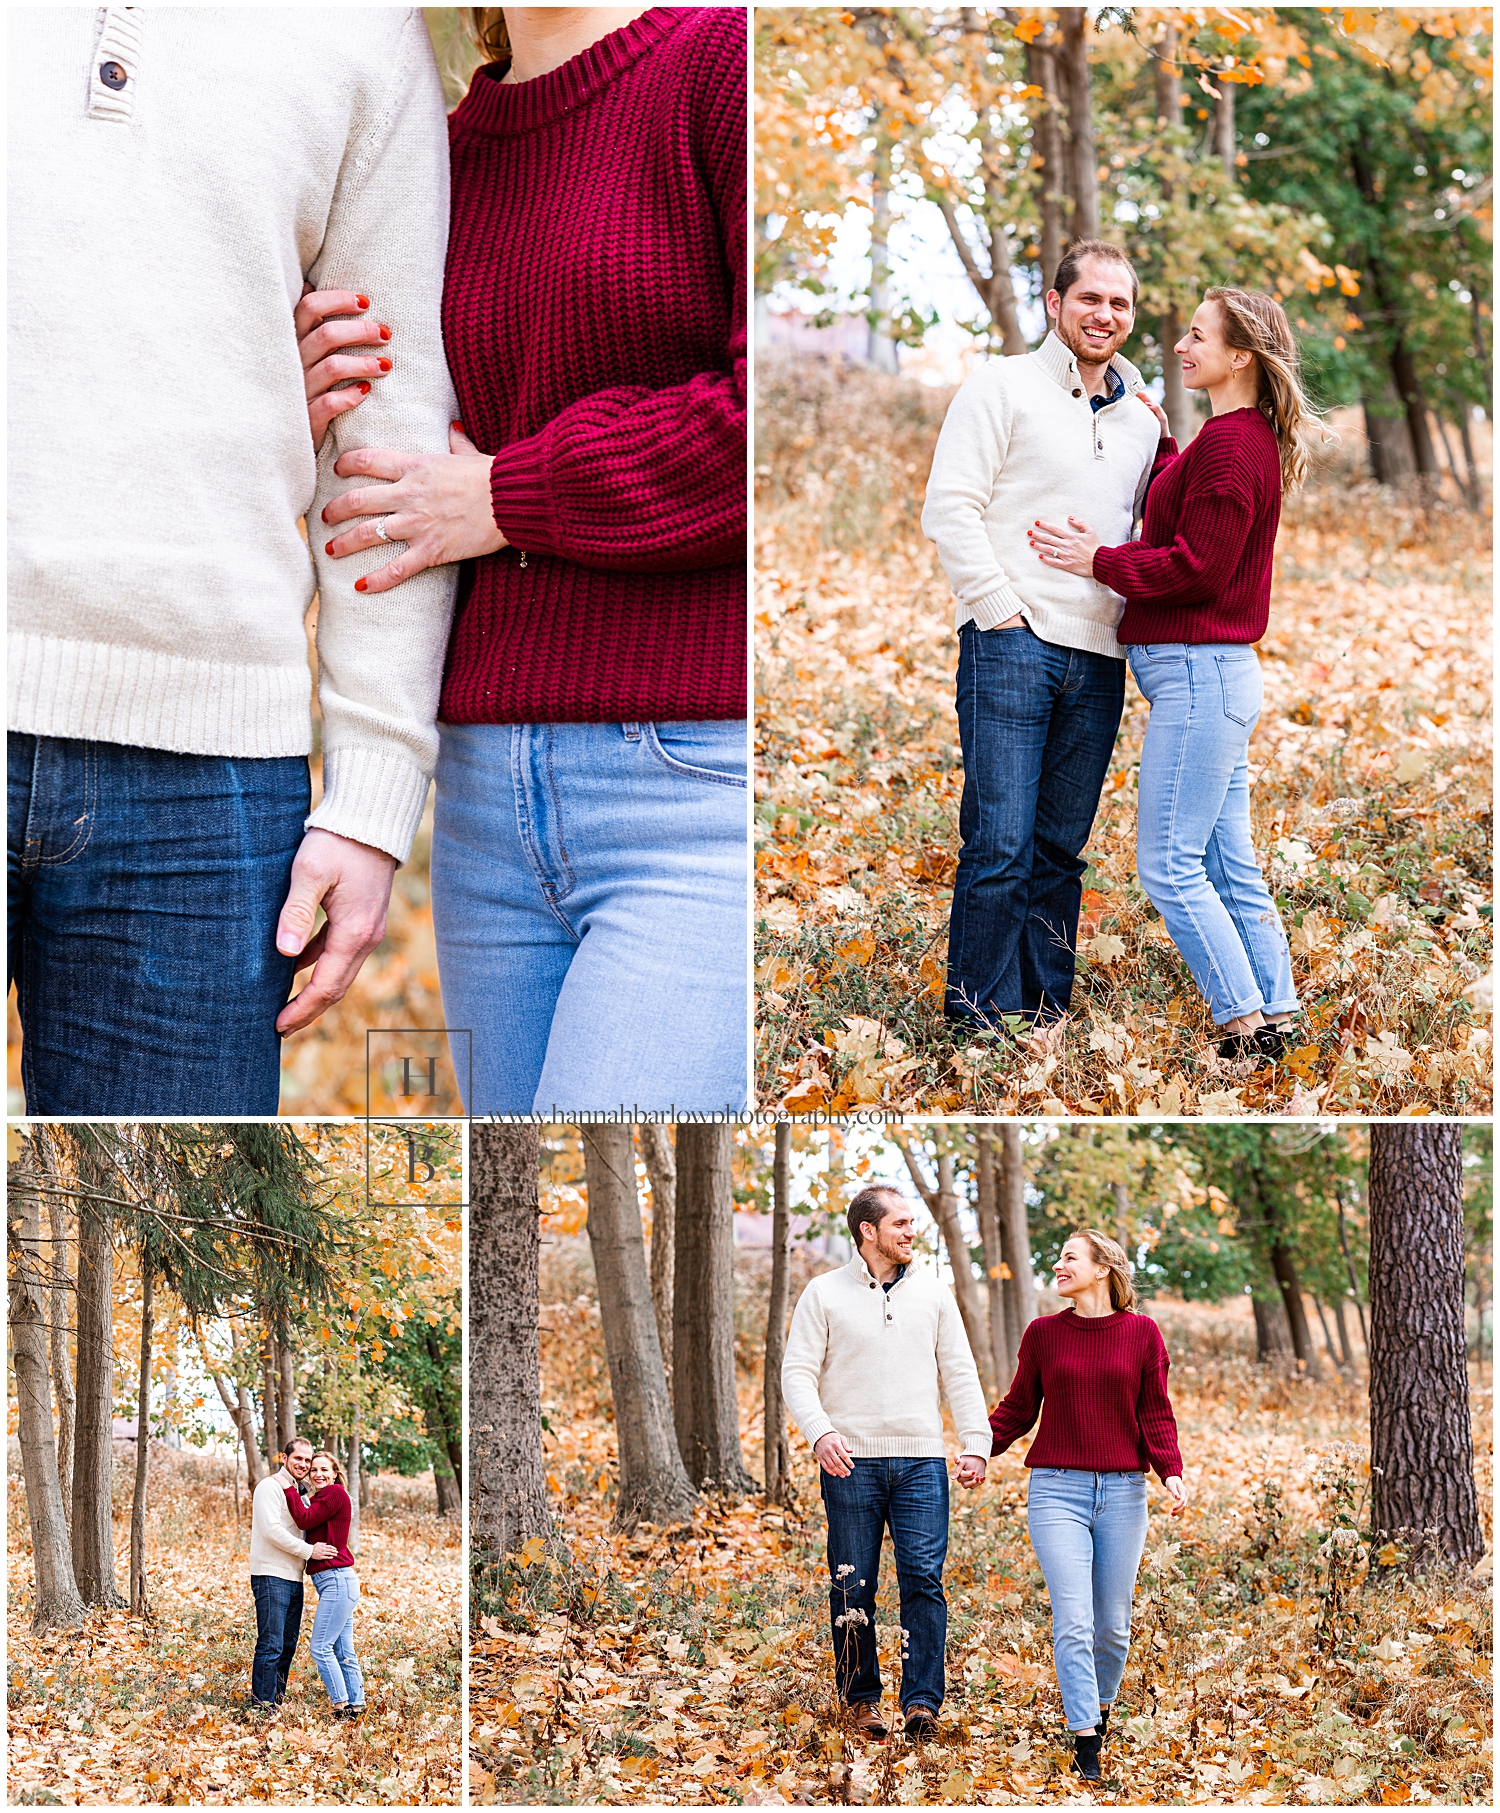 Woman holds fiancé's arms for engagement photos while standing in orange leaves.